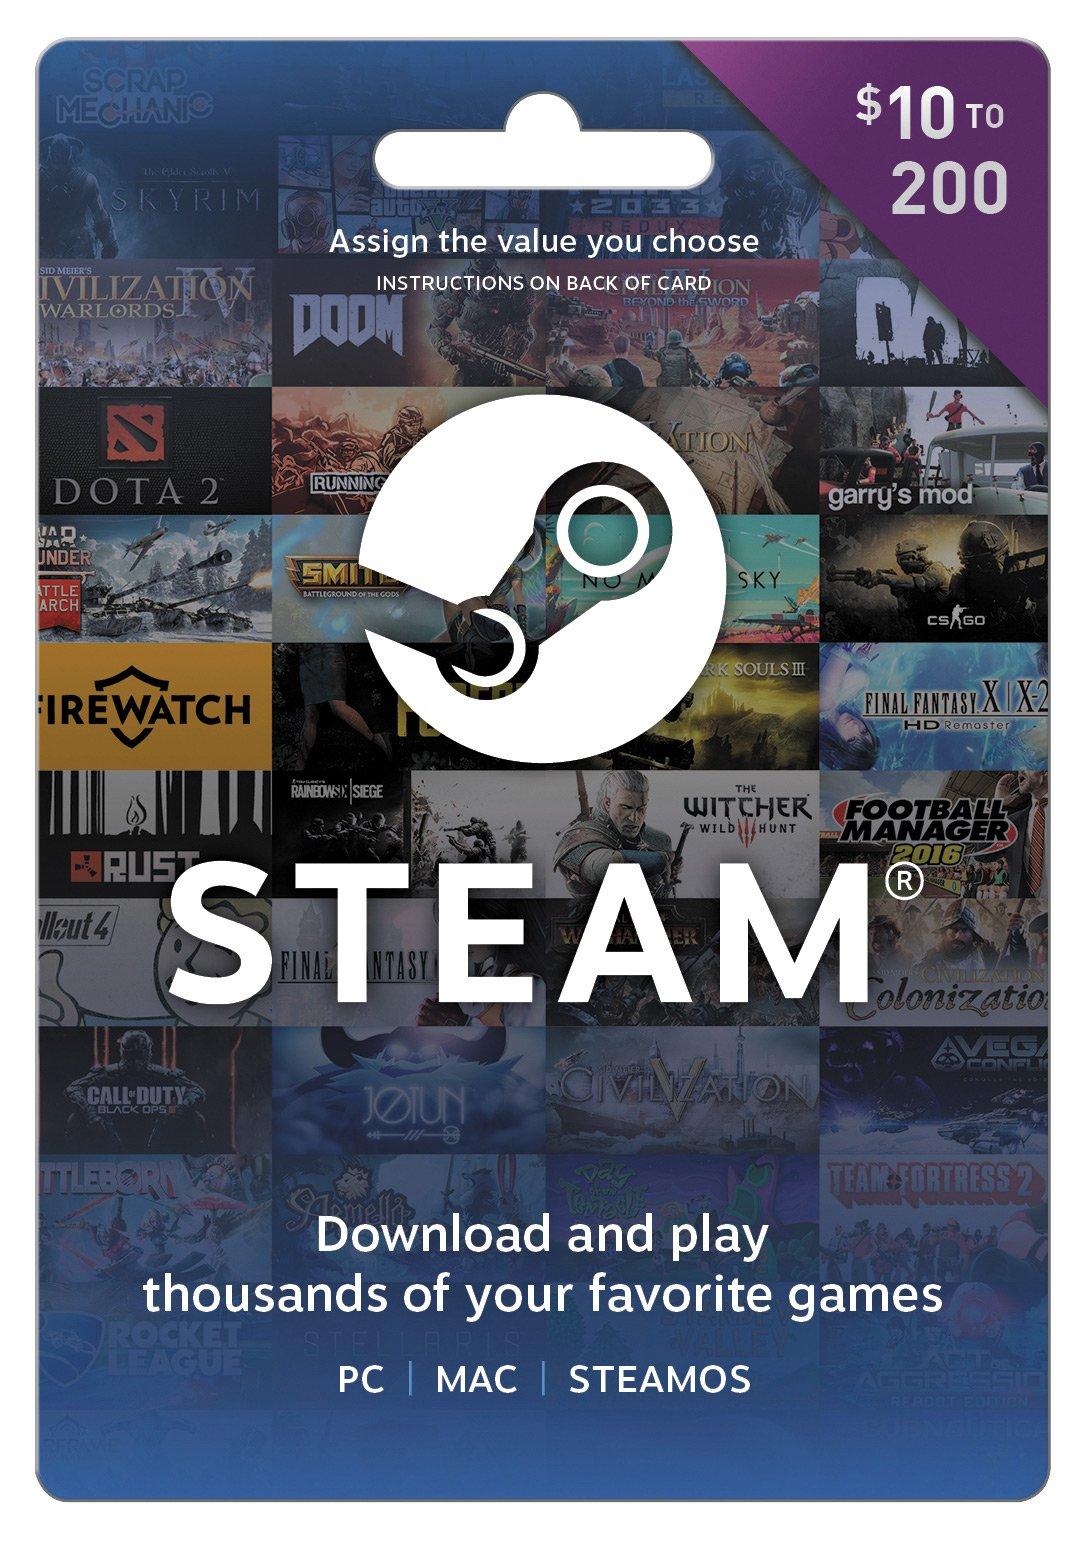 can you buy steam gift cards with gamestop gift cards